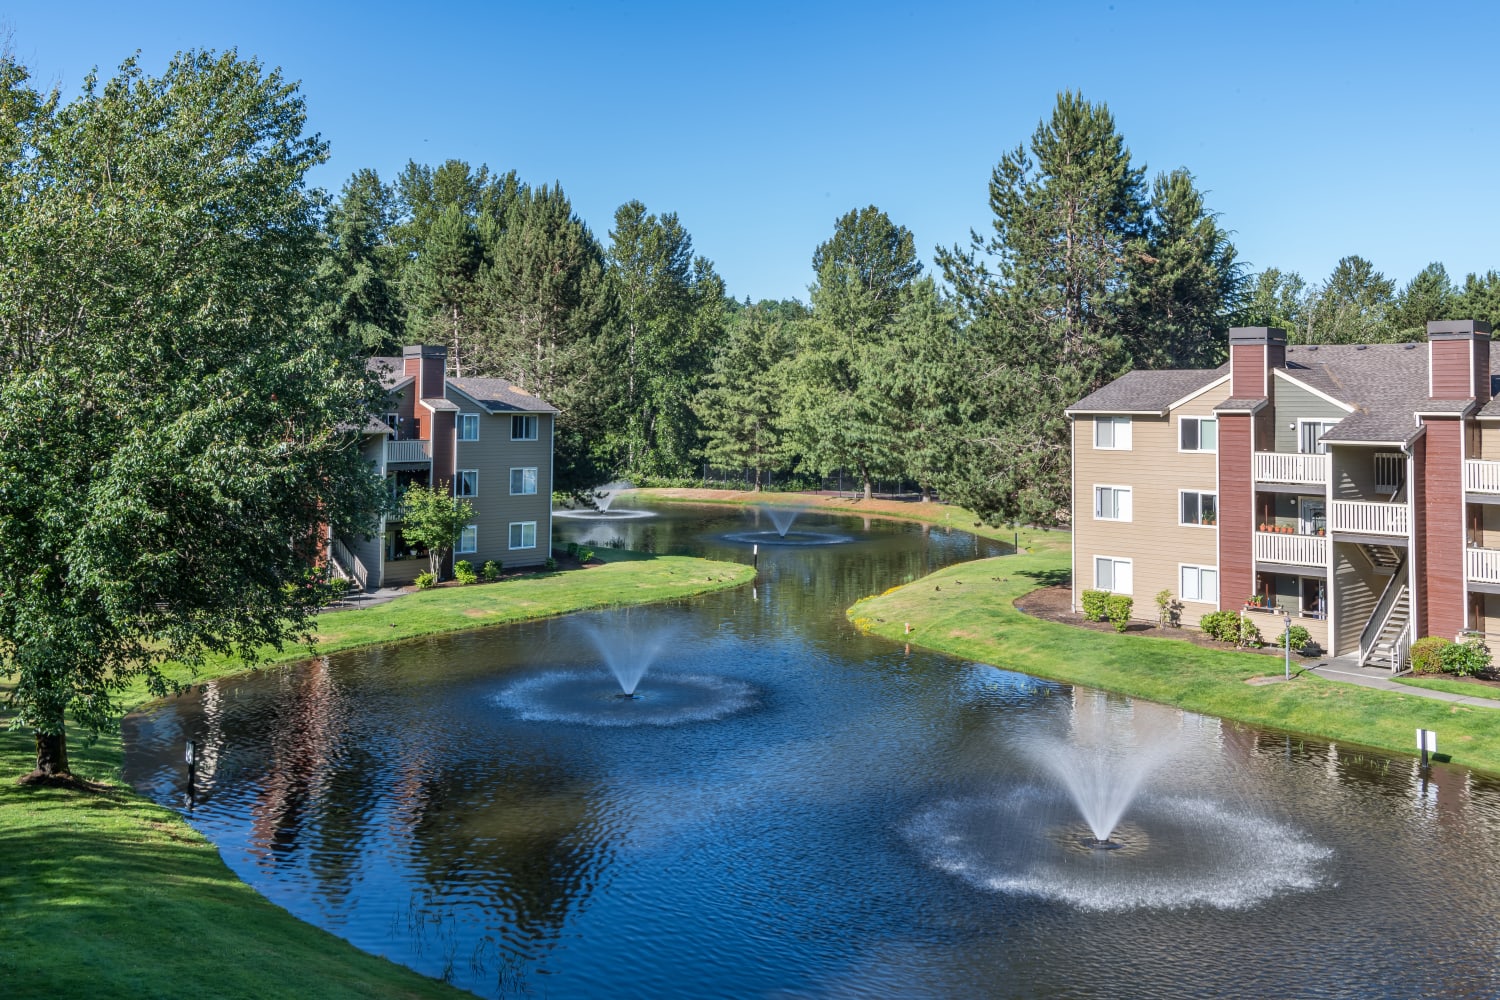 Exterior of community building with pond and fountain at The Preserve at Forbes Creek in Kirkland, Washington